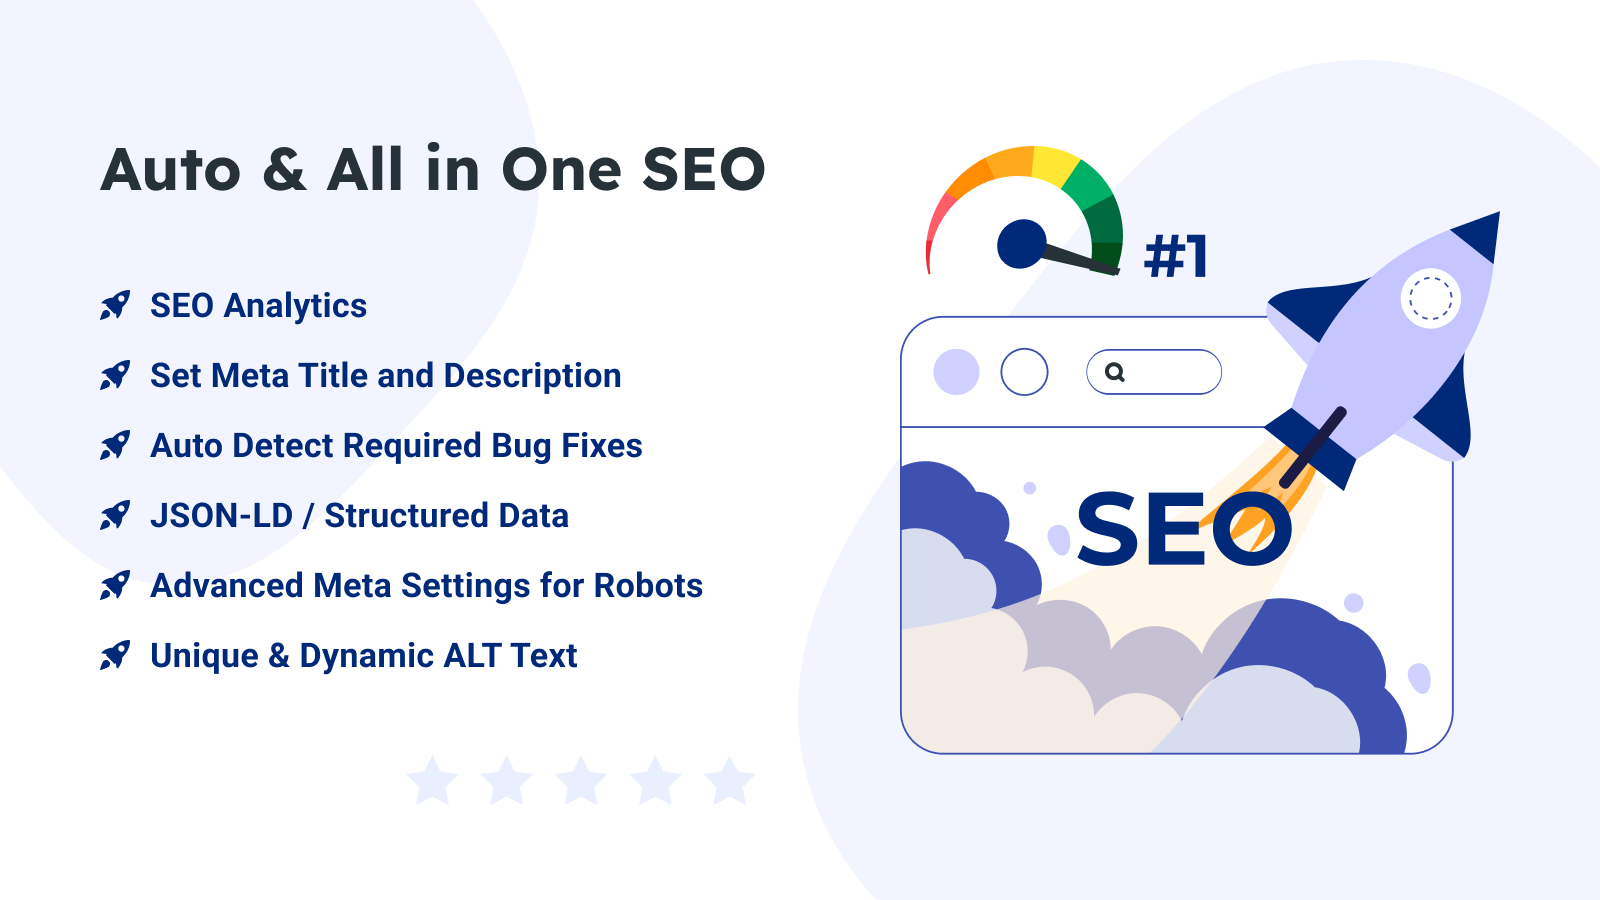 All in One SEO - Designerly